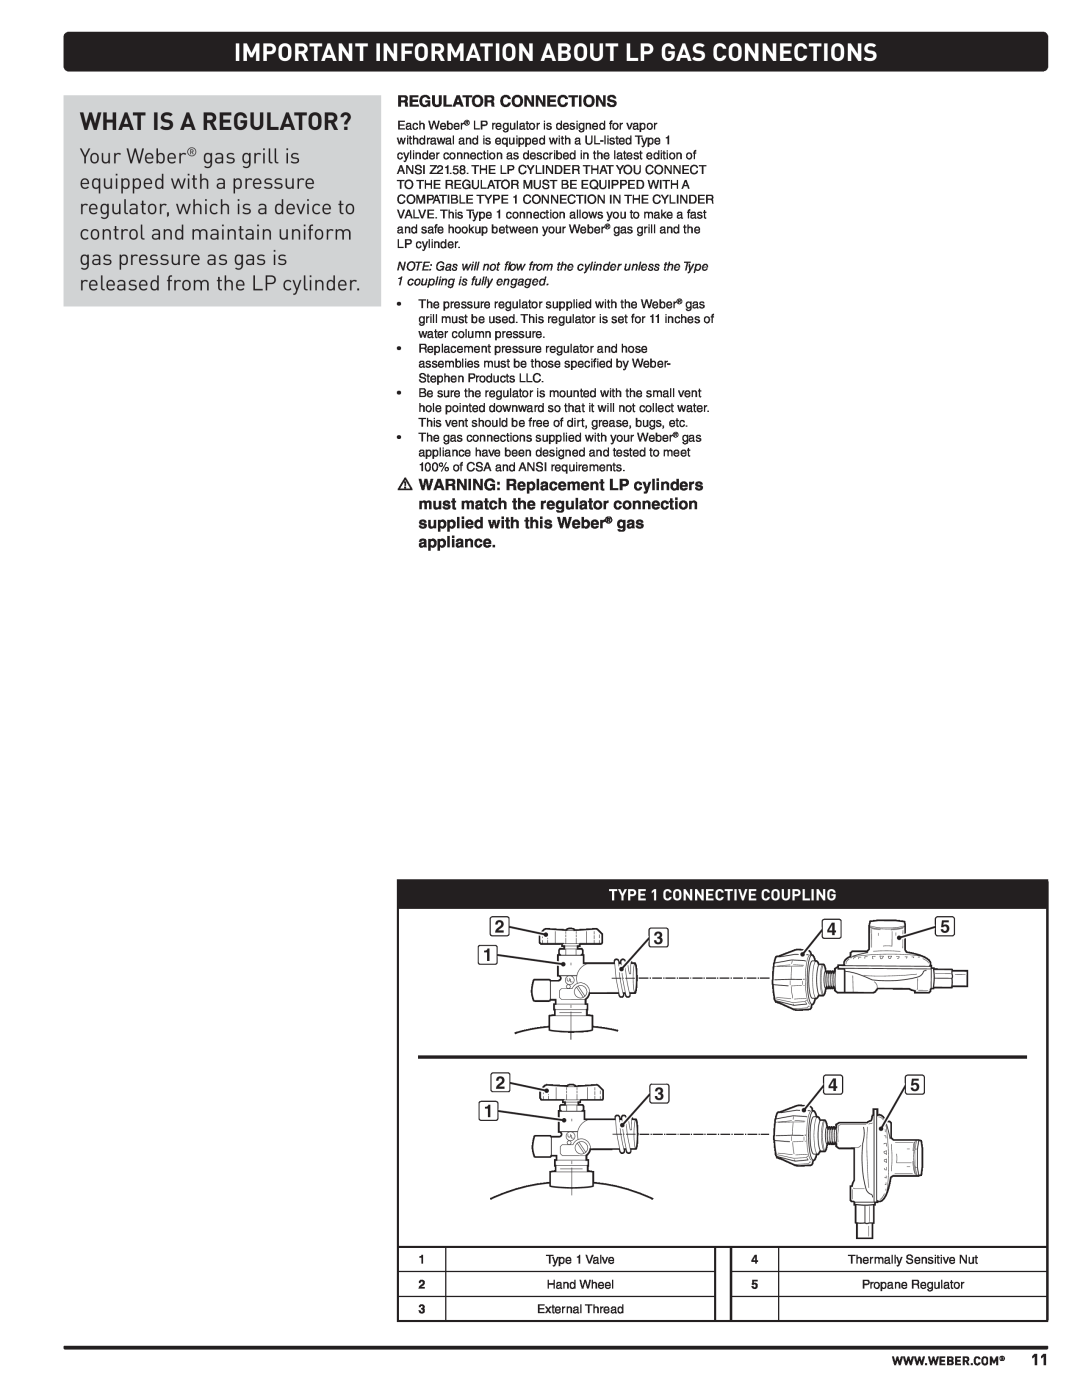 Weber PL - PG. 59 57205 Important Information About Lp Gas Connections, What Is A Regulator?, TYPE 1 CONNECTIVE COUPLING 